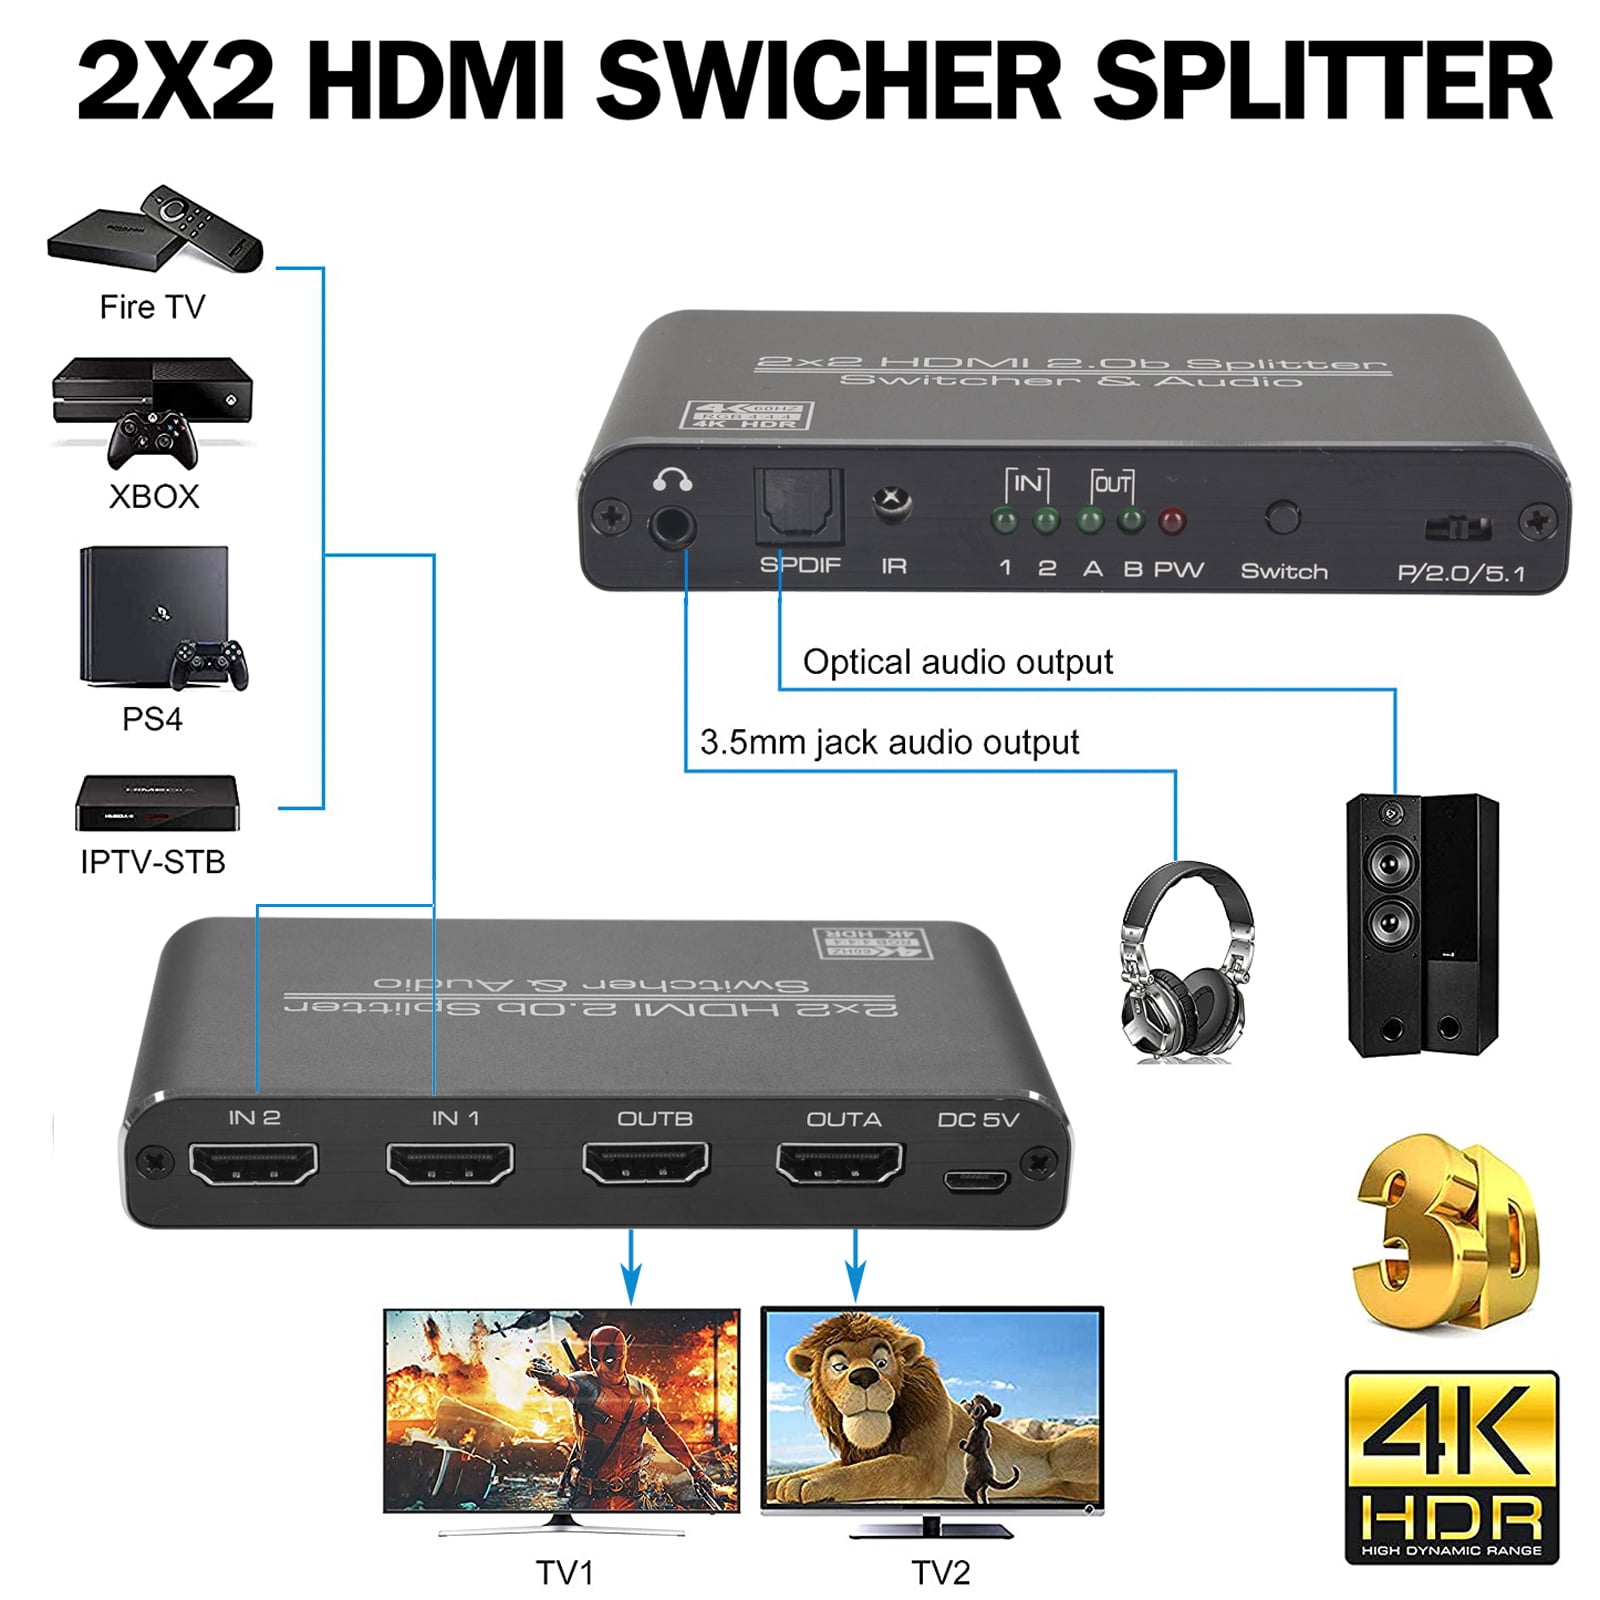 4K HDMI Cord NEWCARE HDMI Cord for HDMI Switch,Support HDMI 2.0 Switcher Audio Extractor Splitter